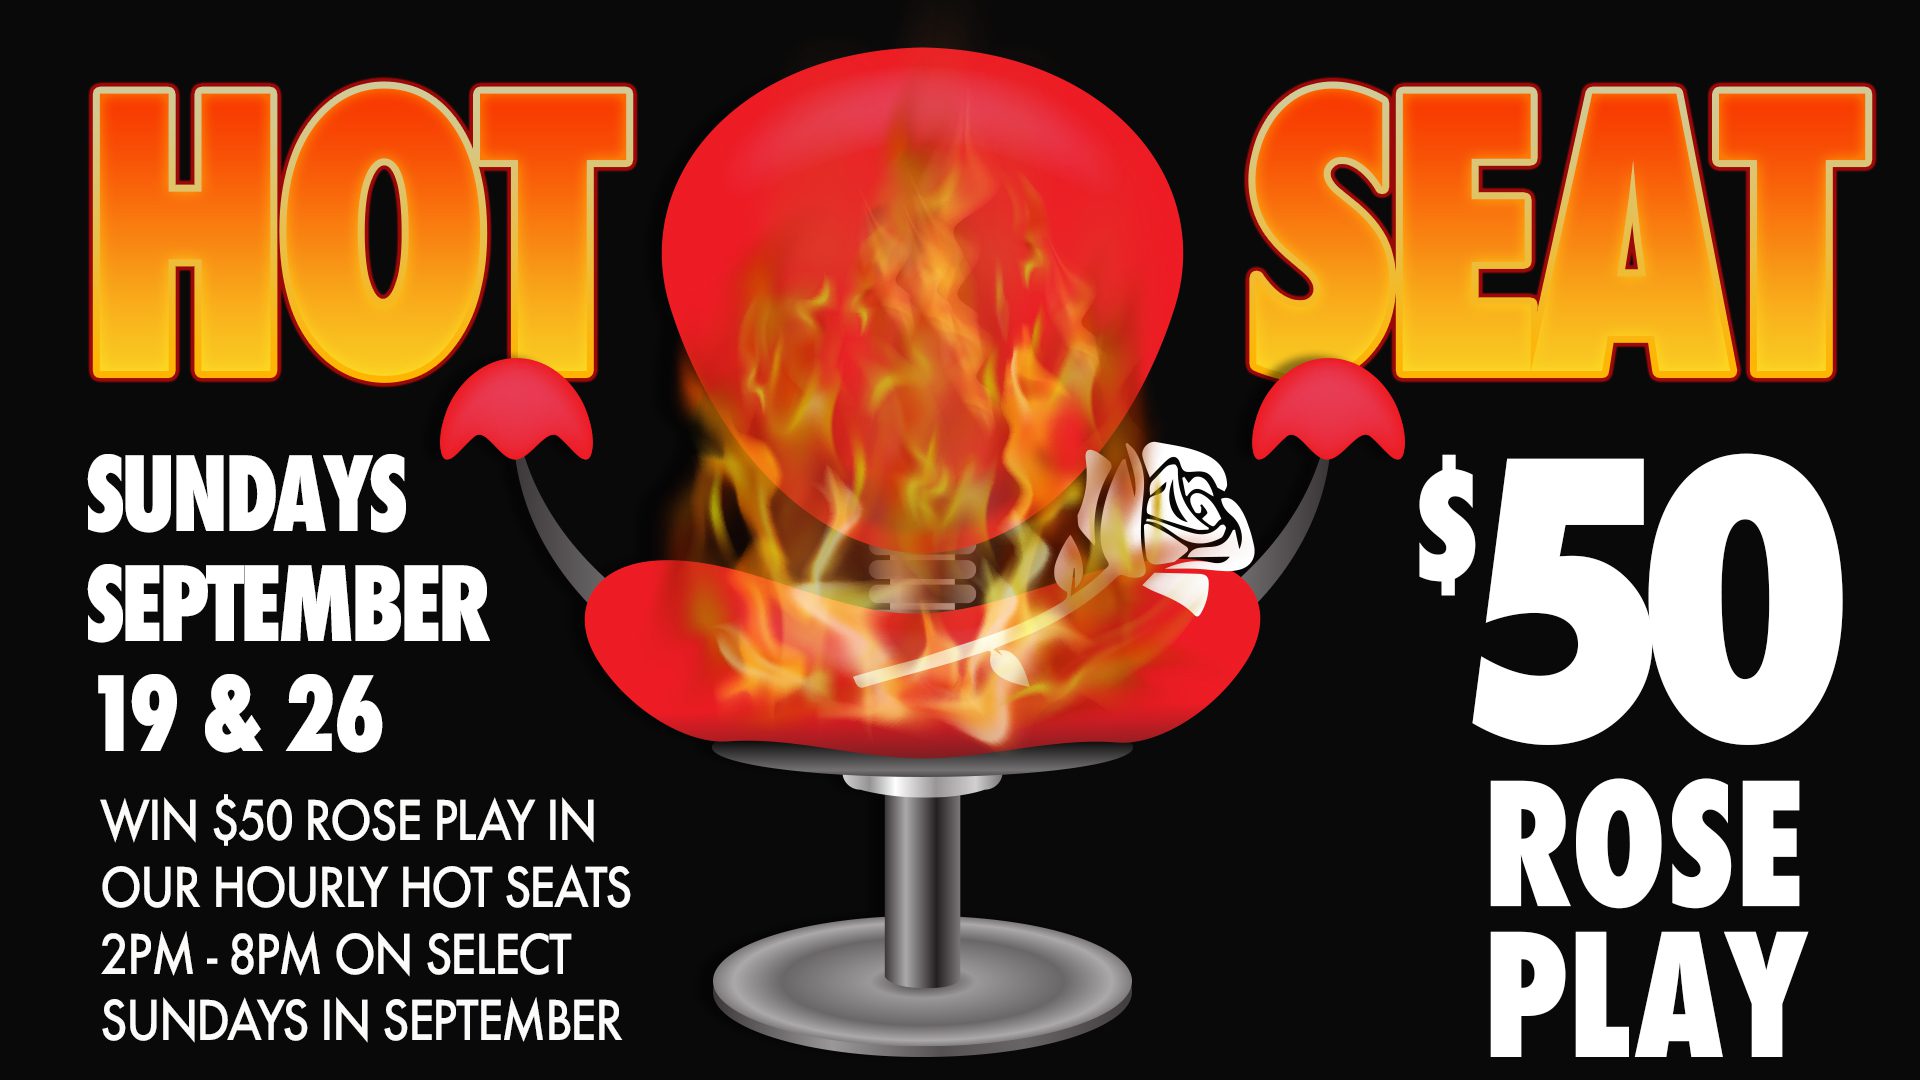 Promotional graphic for 'hot seat' event with $50 'rose play,' scheduled for sundays in september from 2 pm - 8 pm.